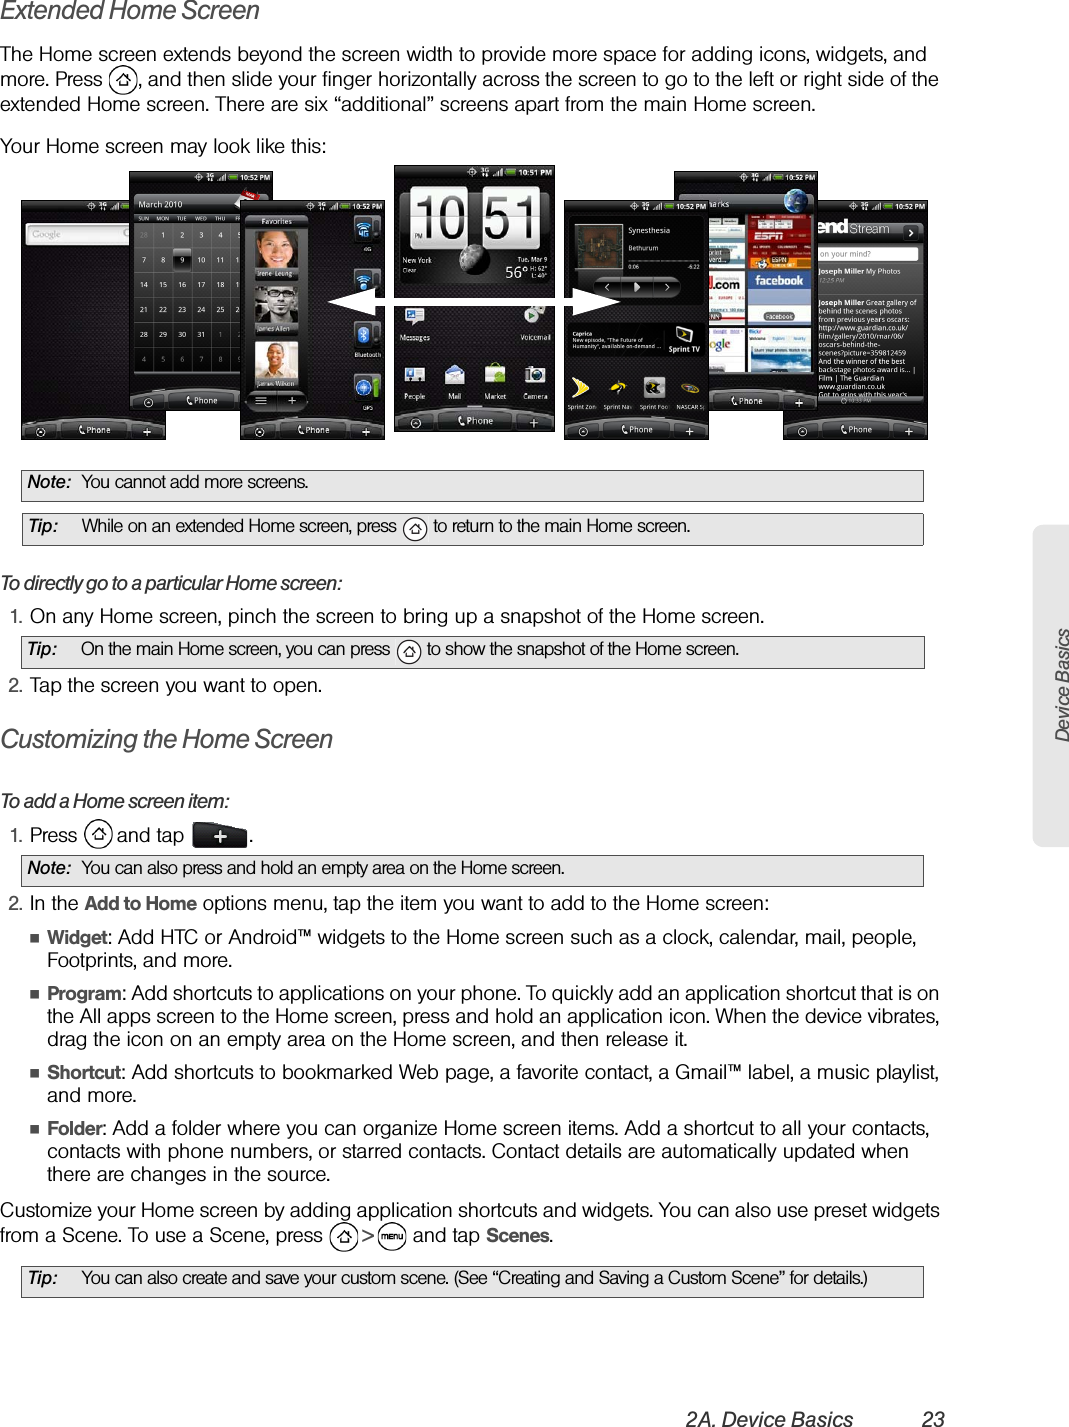 Device Basics2A. Device Basics 23Extended Home ScreenThe Home screen extends beyond the screen width to provide more space for adding icons, widgets, and more. Press  , and then slide your finger horizontally across the screen to go to the left or right side of the extended Home screen. There are six “additional” screens apart from the main Home screen.Your Home screen may look like this:To directly go to a particular Home screen:1. On any Home screen, pinch the screen to bring up a snapshot of the Home screen.2. Tap the screen you want to open.Customizing the Home ScreenTo add a Home screen item:1. Press   and tap  .2. In the Add to Home options menu, tap the item you want to add to the Home screen:ⅢWidget: Add HTC or Android™ widgets to the Home screen such as a clock, calendar, mail, people, Footprints, and more.ⅢProgram: Add shortcuts to applications on your phone. To quickly add an application shortcut that is on the All apps screen to the Home screen, press and hold an application icon. When the device vibrates, drag the icon on an empty area on the Home screen, and then release it.ⅢShortcut: Add shortcuts to bookmarked Web page, a favorite contact, a Gmail™ label, a music playlist, and more.ⅢFolder: Add a folder where you can organize Home screen items. Add a shortcut to all your contacts, contacts with phone numbers, or starred contacts. Contact details are automatically updated when there are changes in the source.Customize your Home screen by adding application shortcuts and widgets. You can also use preset widgets from a Scene. To use a Scene, press   &gt;   and tap Scenes.Note: You cannot add more screens.Tip: While on an extended Home screen, press   to return to the main Home screen.Tip: On the main Home screen, you can press   to show the snapshot of the Home screen. Note: You can also press and hold an empty area on the Home screen.Tip: You can also create and save your custom scene. (See “Creating and Saving a Custom Scene” for details.)